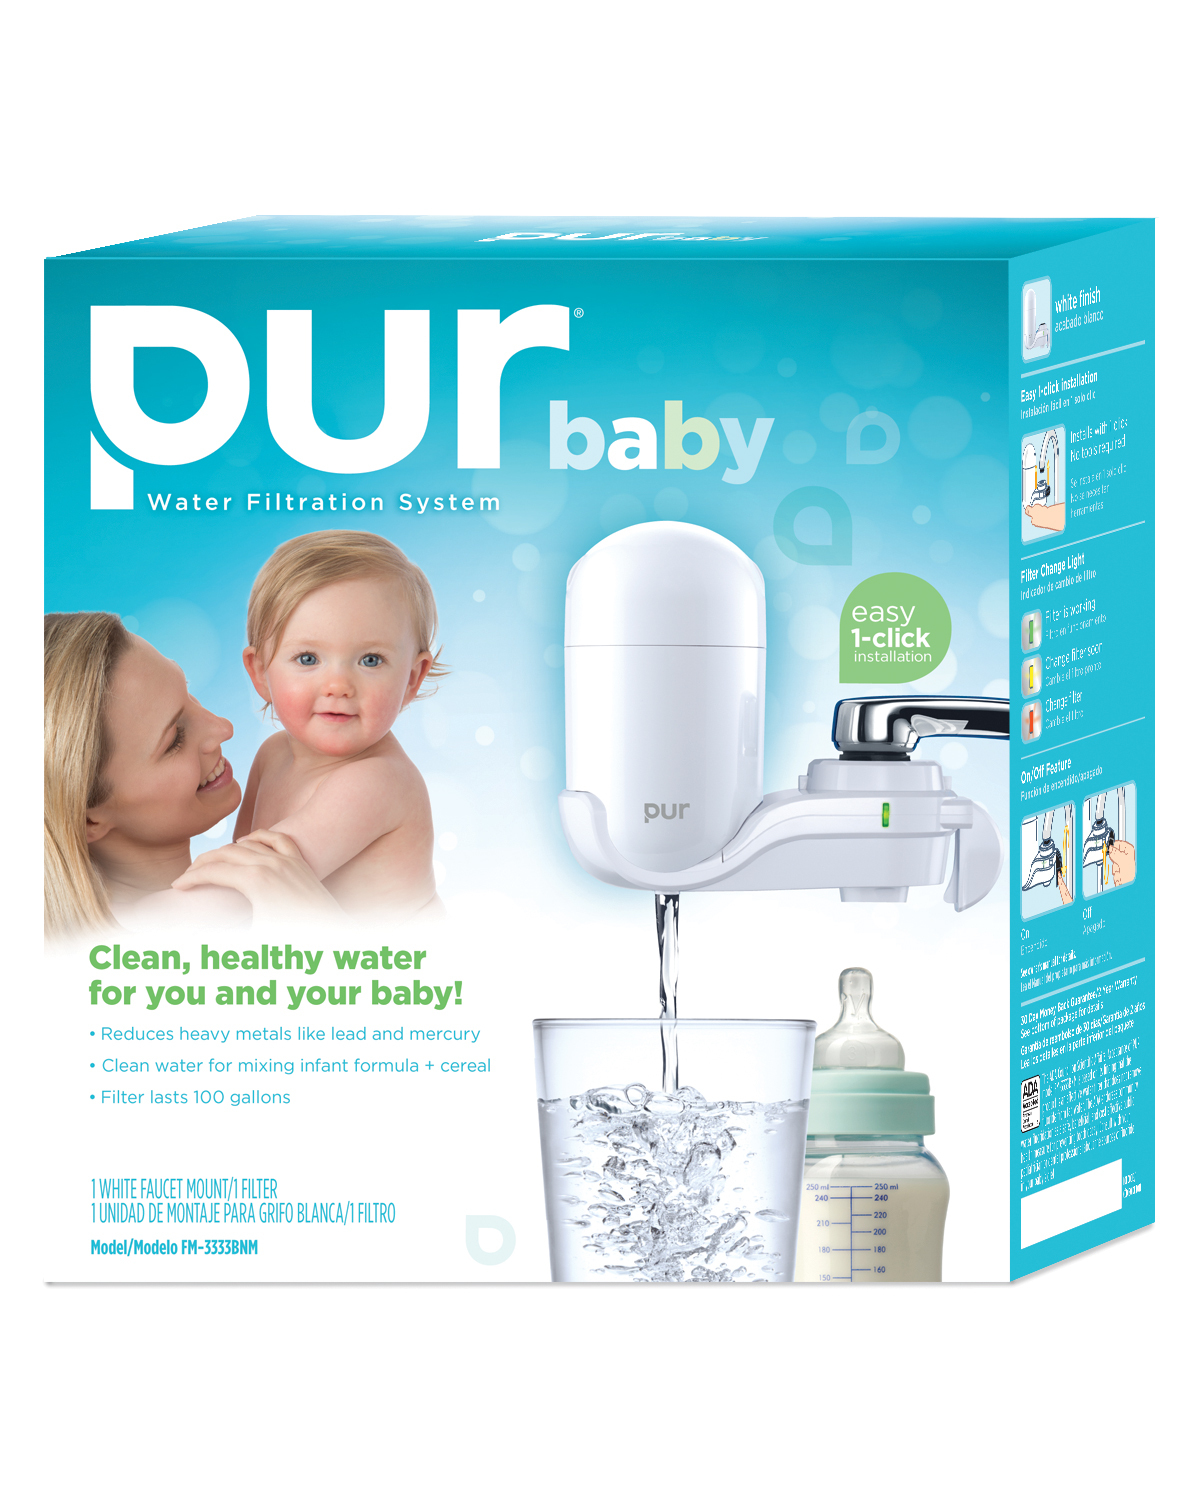 PUR BABY WATER FILTRATION SYSTEM | Business Wire